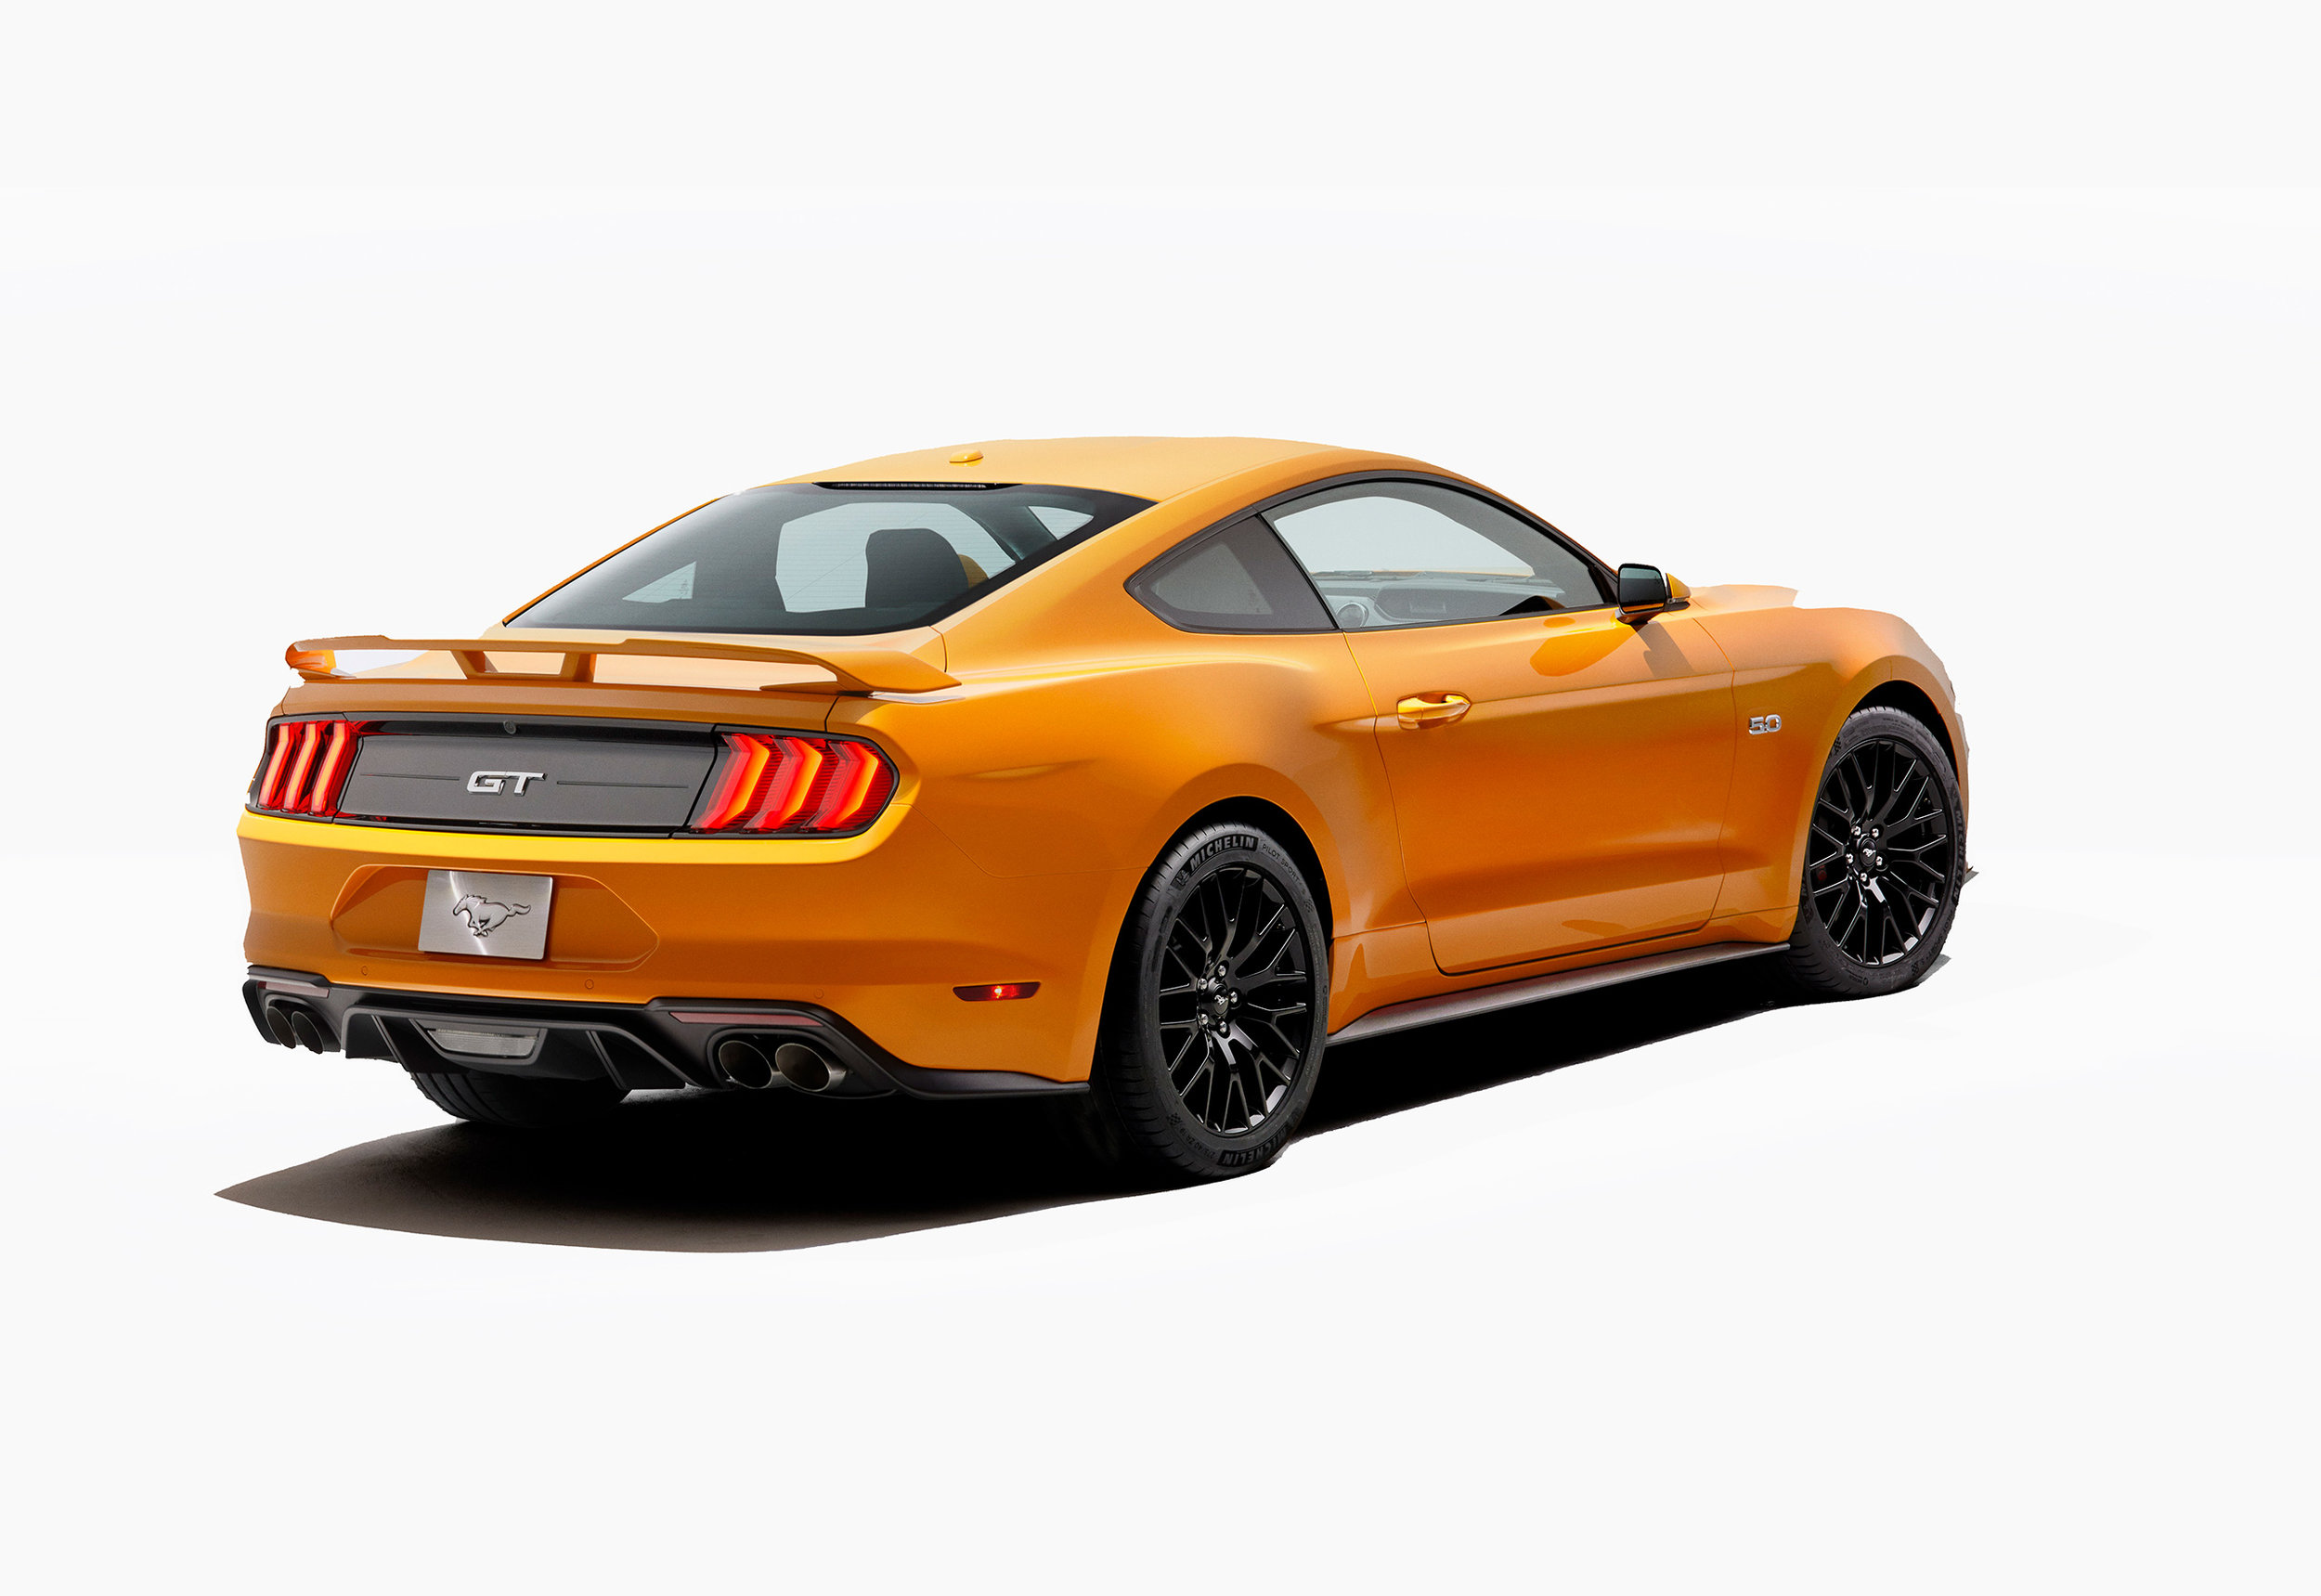 New-Ford-Mustang-V8-GT-with-Performace-Pack-in-Orange-Fury-7.jpg